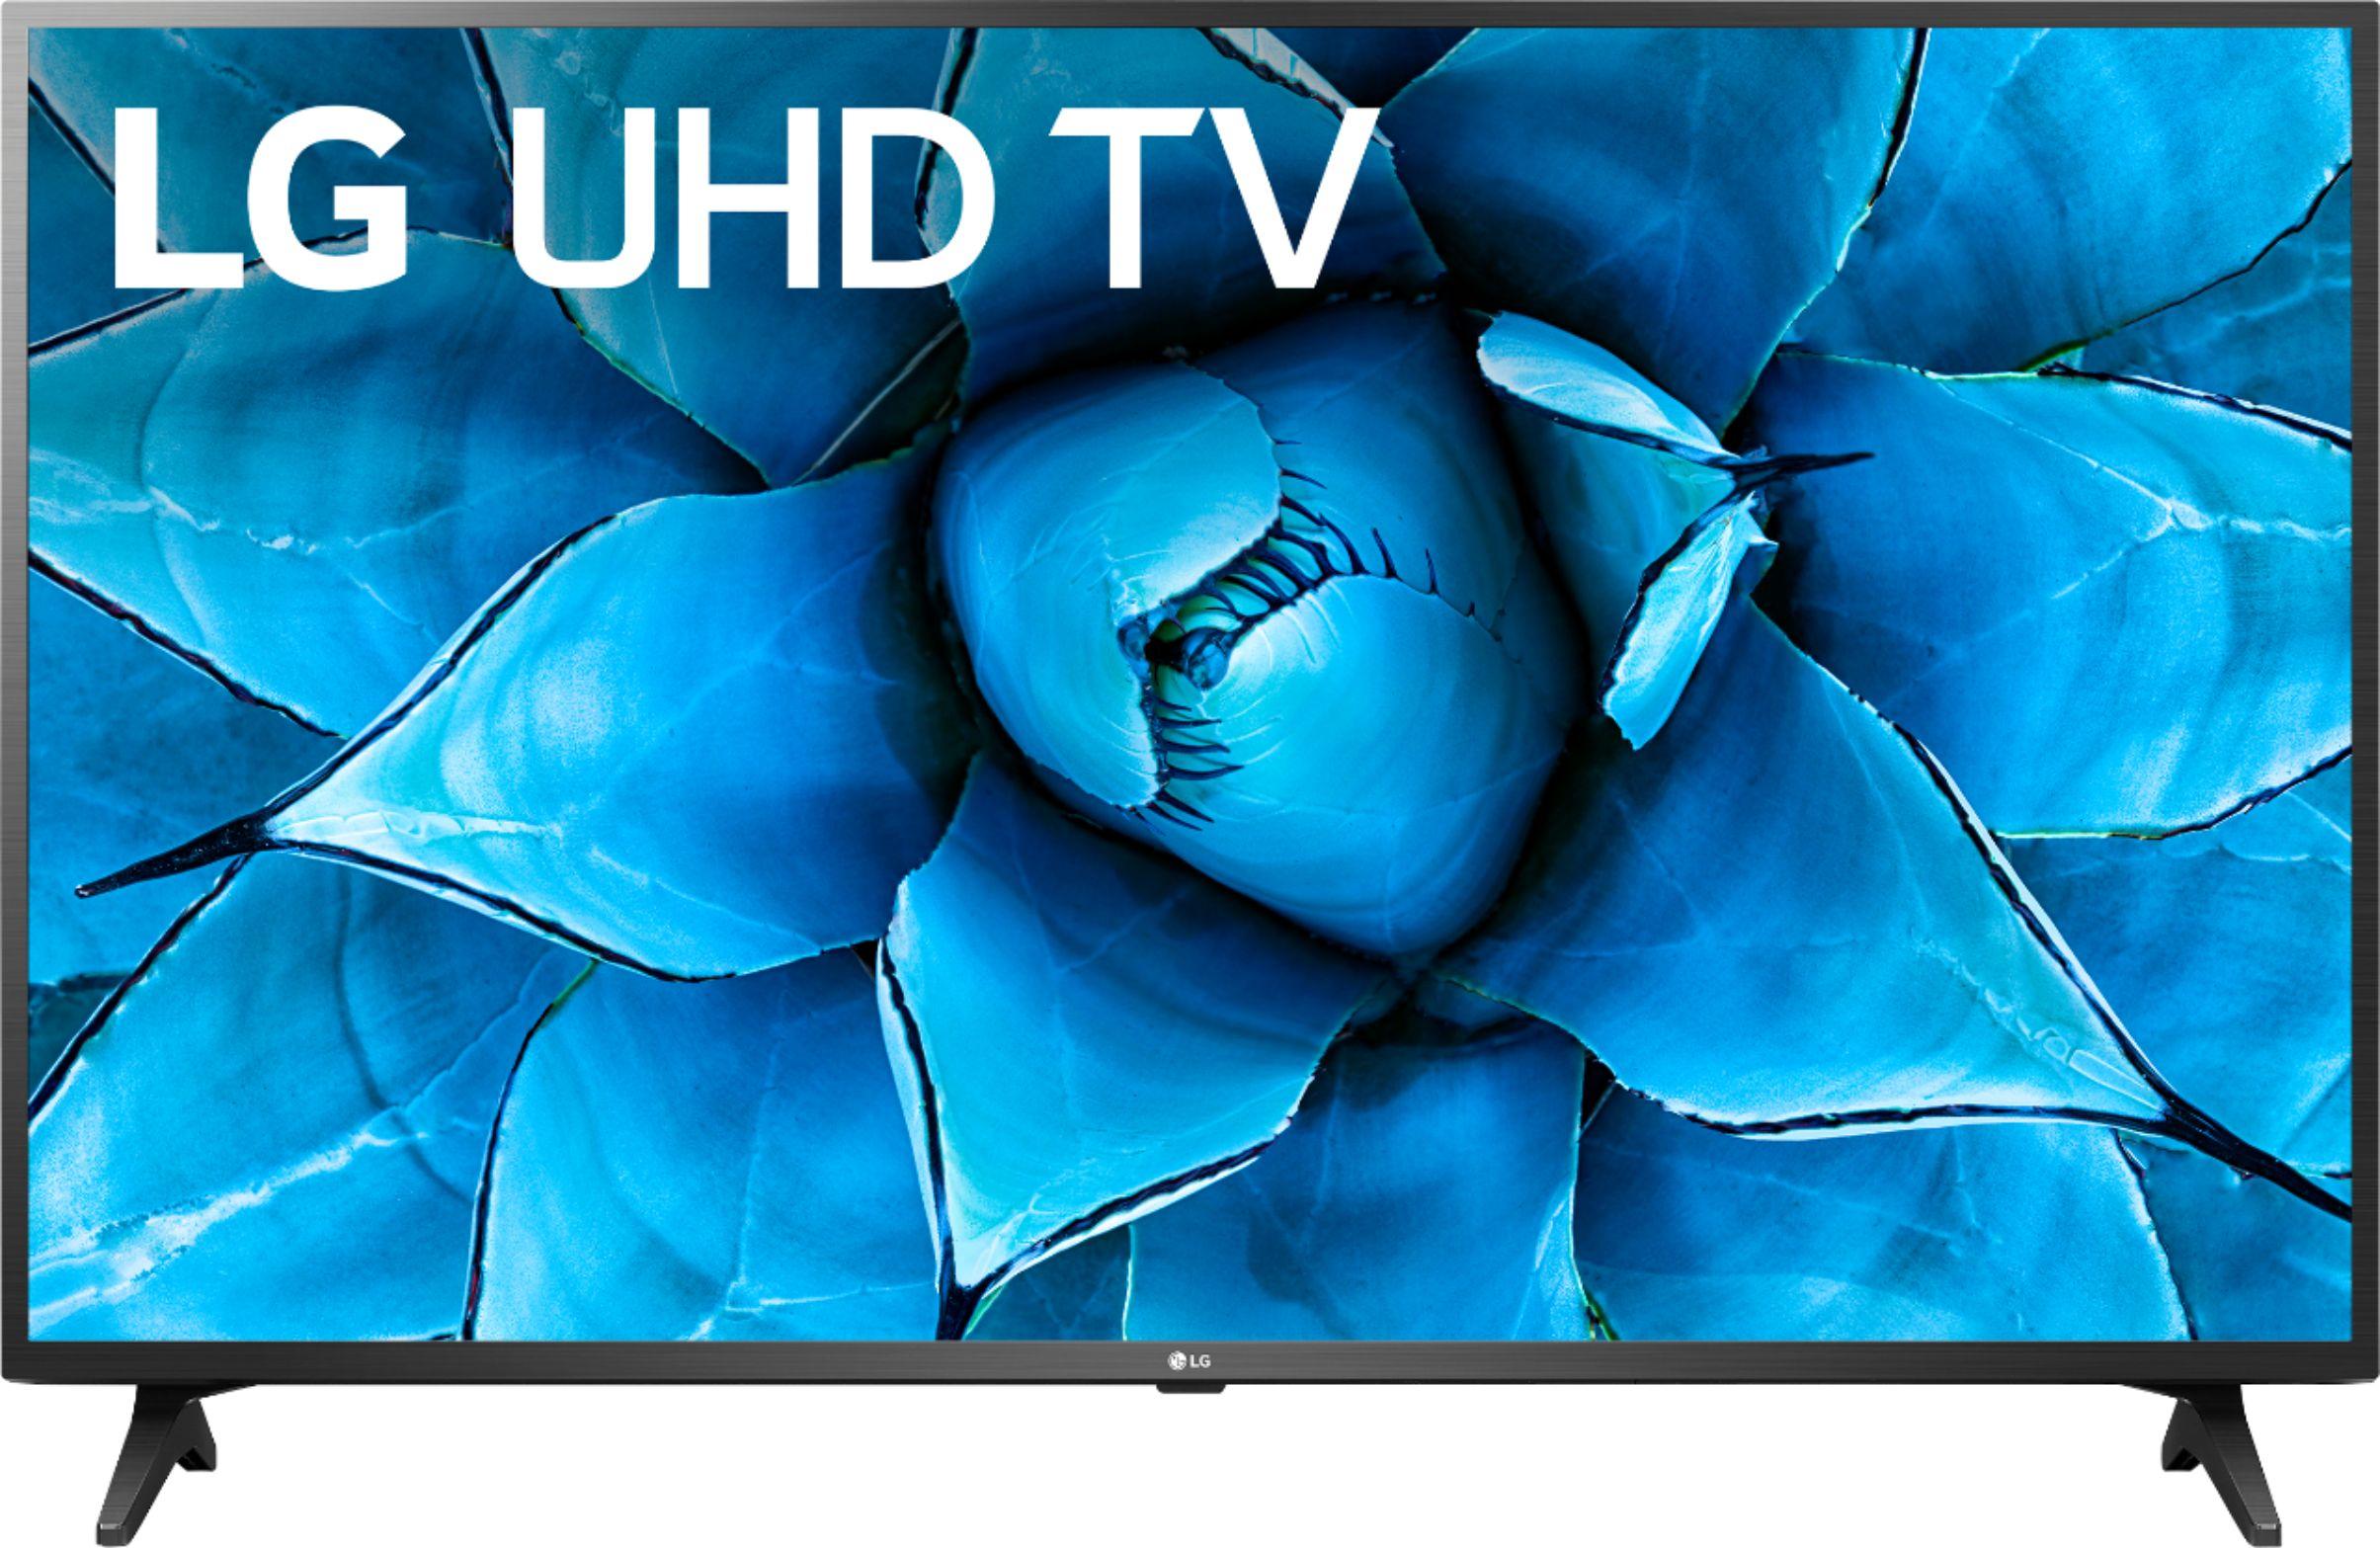 LG 50in 50UN7300PUF 4K UHD Smart LED HDTV for $299.99 Shipped